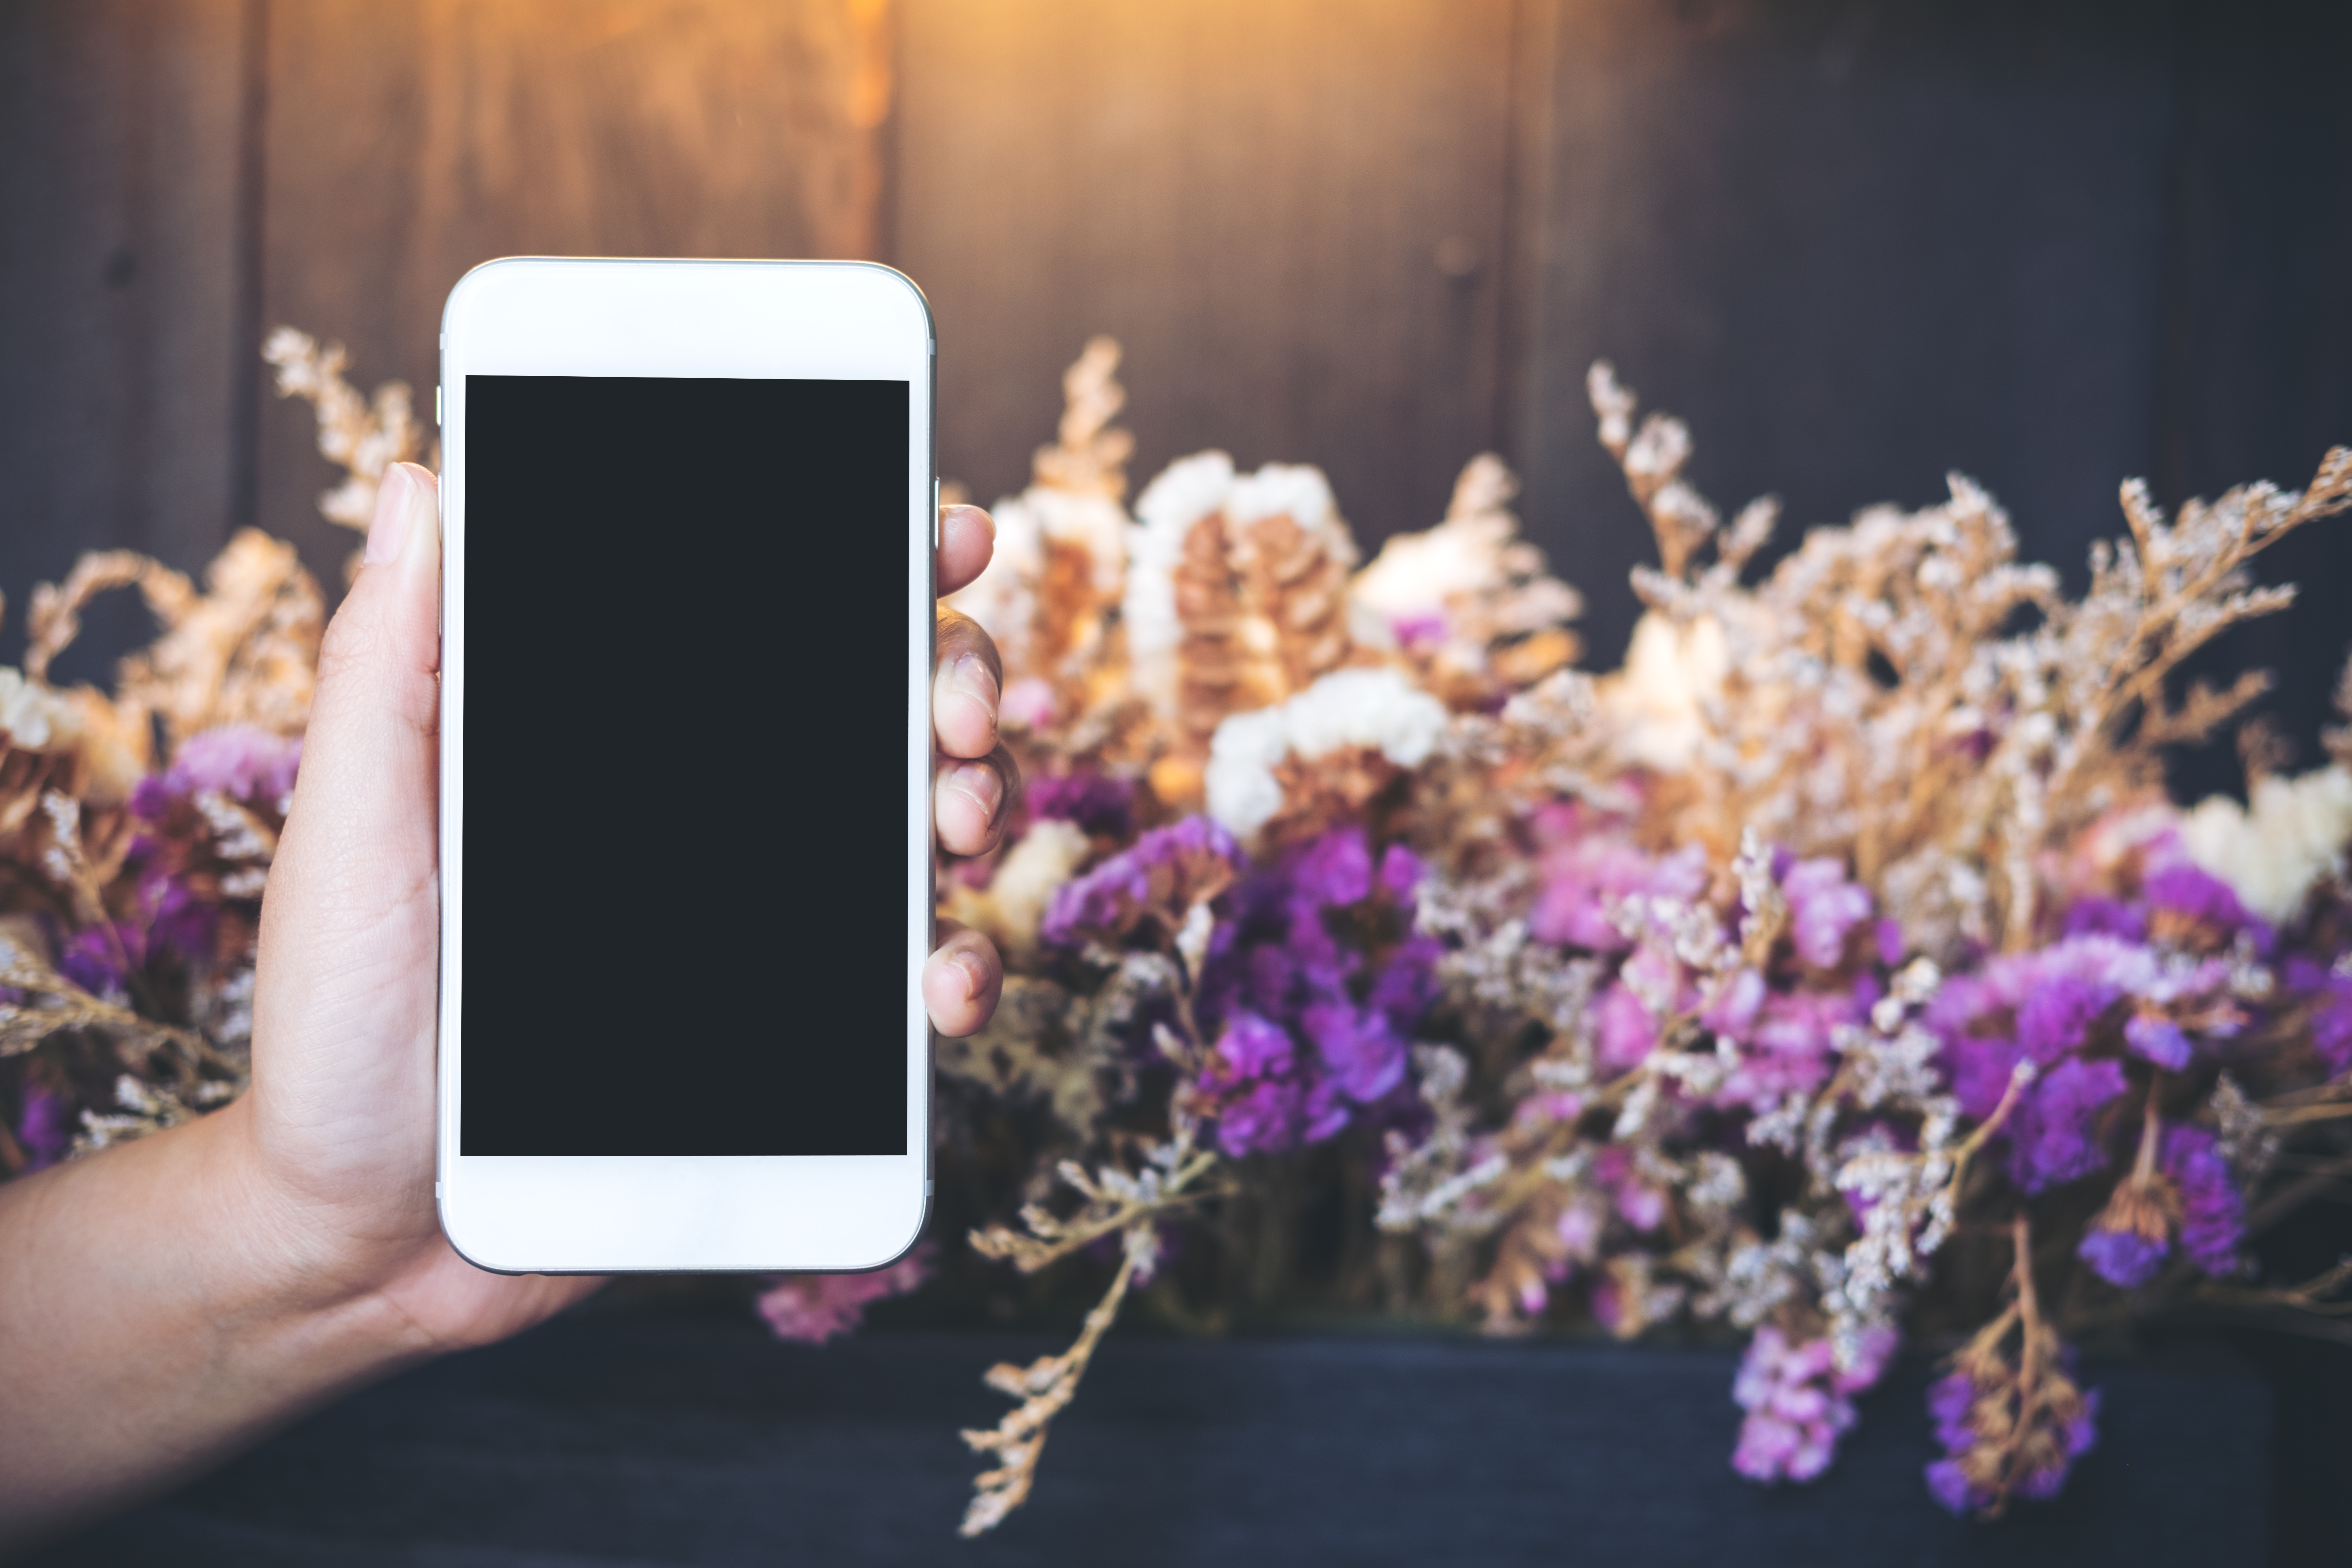 on demand flower delivery app